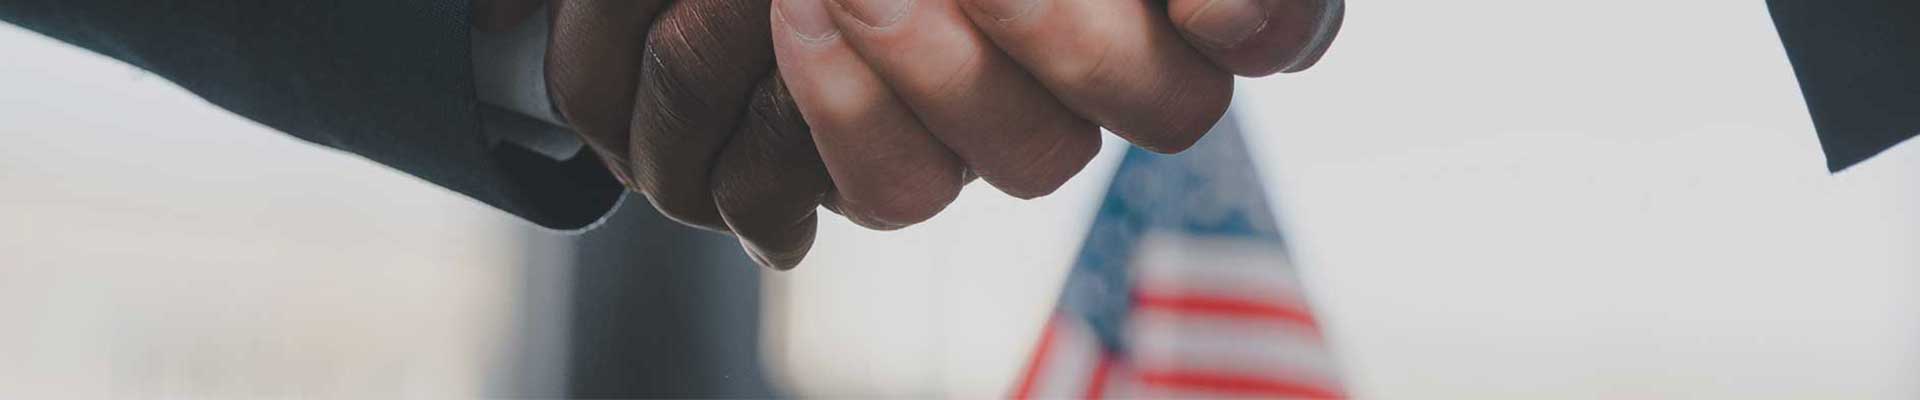 Two individuals clasping hands with an out-of-focus american flag in the background.